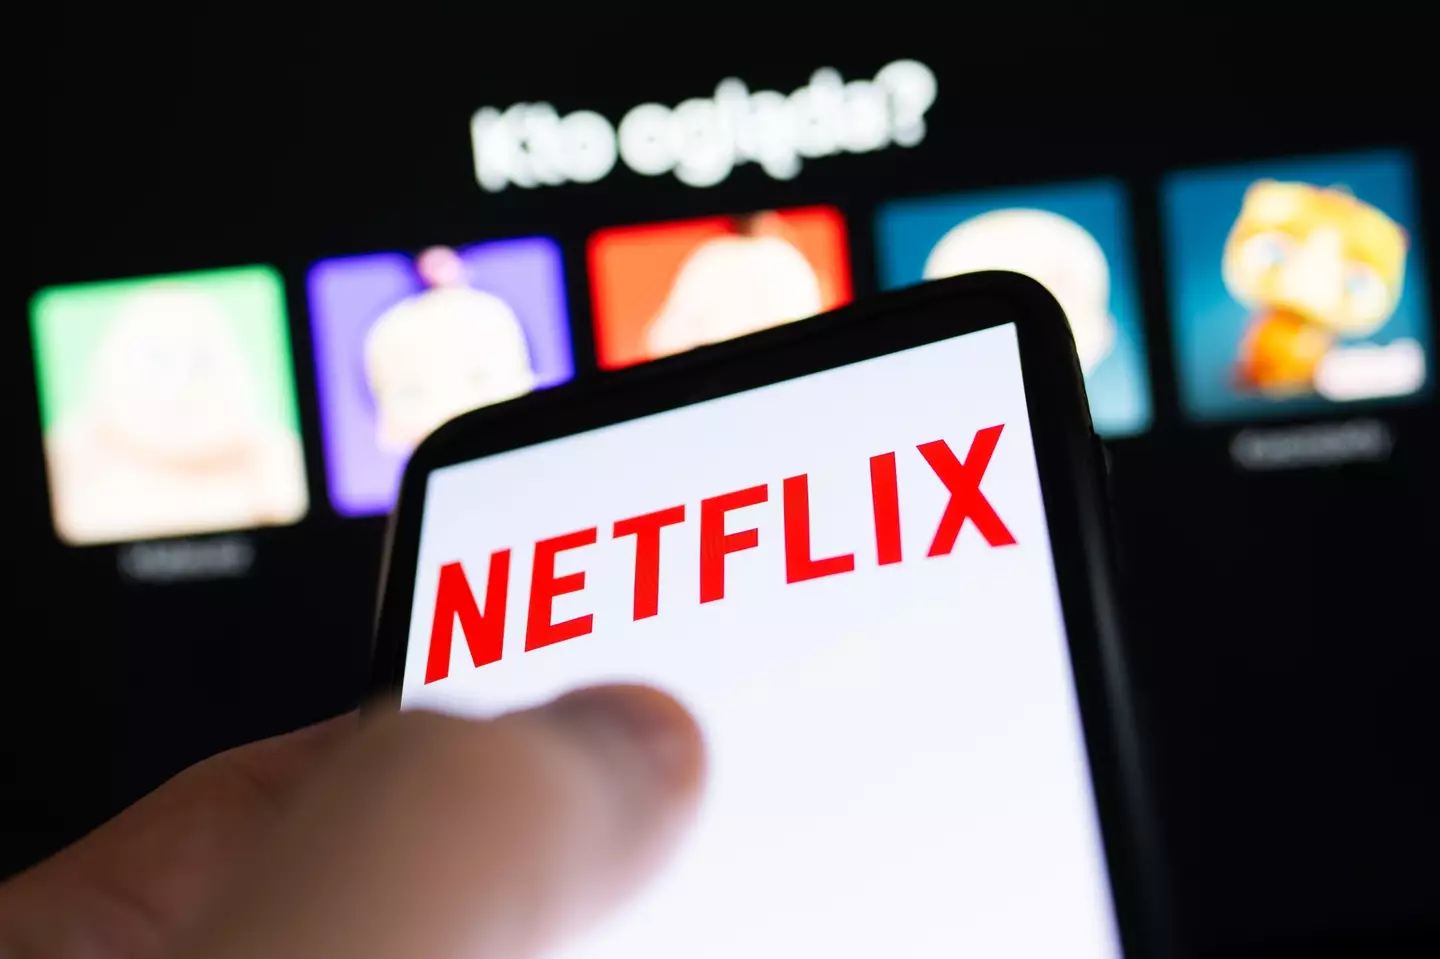 Netflix Ends Apple Pay Support: What It Means for Your Binge-Watching Habit